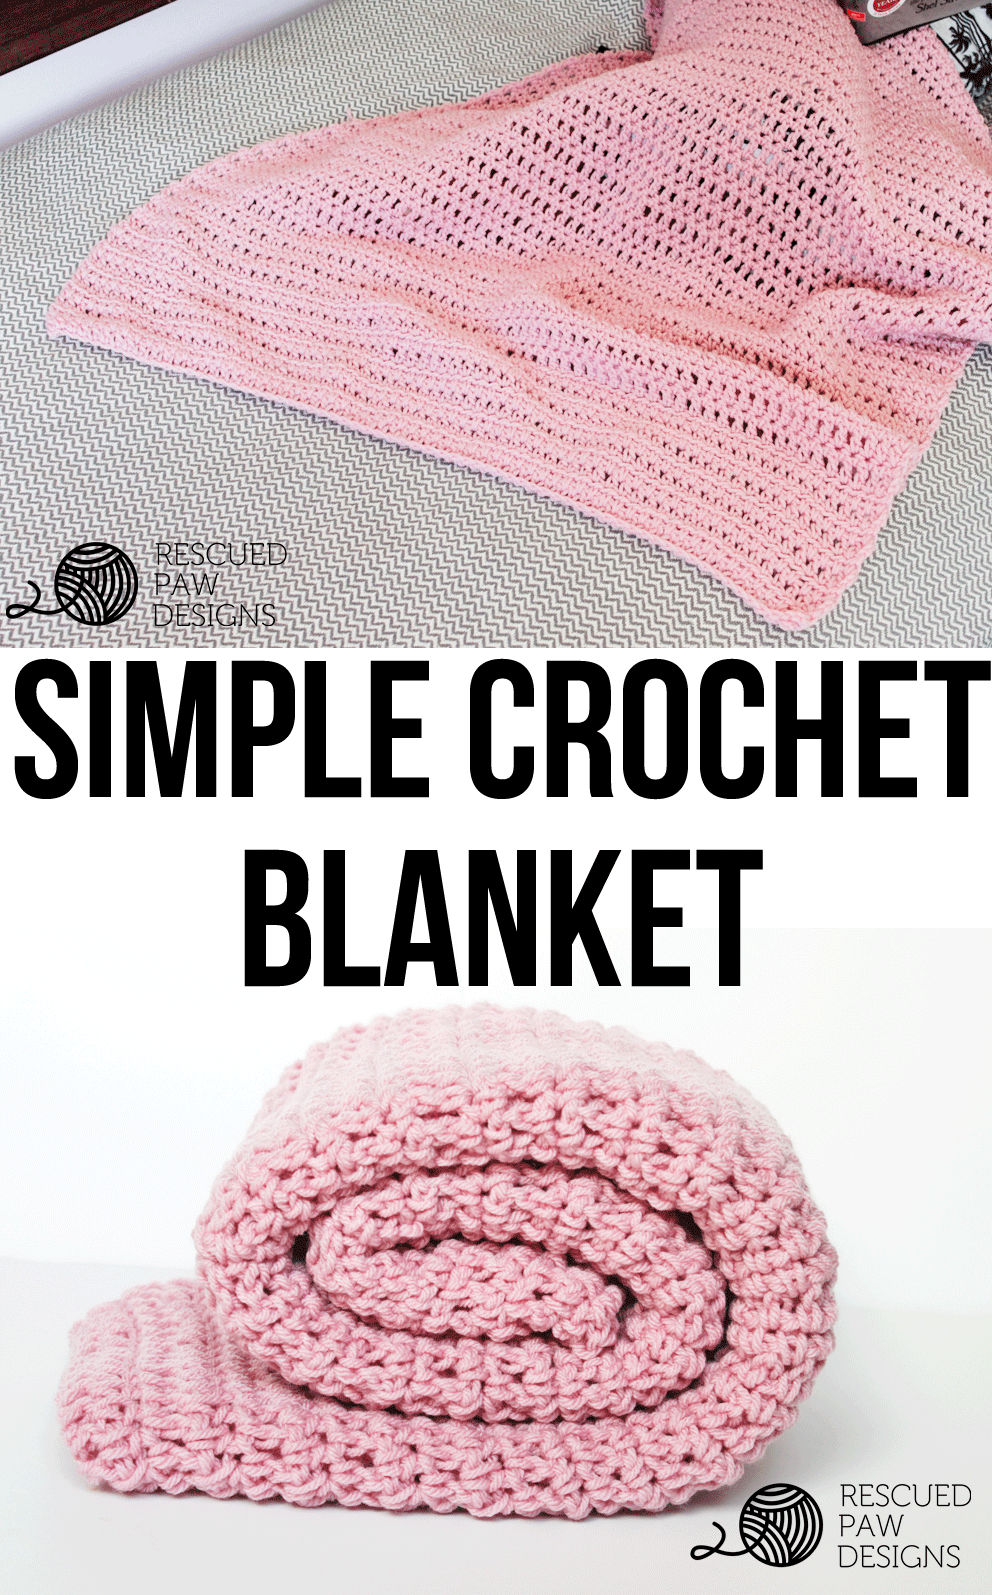 Free crochet patterns for beginners: blanket by Rescued Paw Designs 